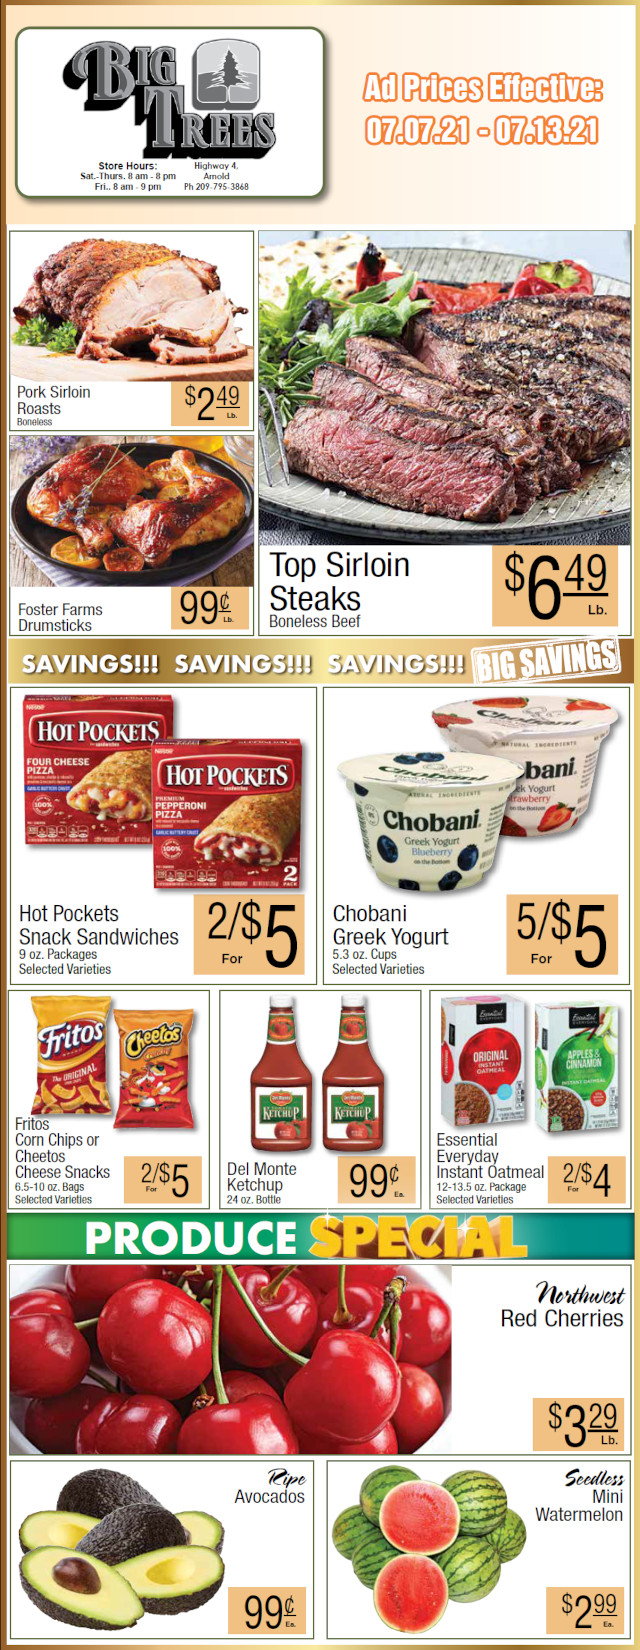 Big Trees Market Weekly Ad & Grocery Specials Through July 13th! Shop Local & Save!!